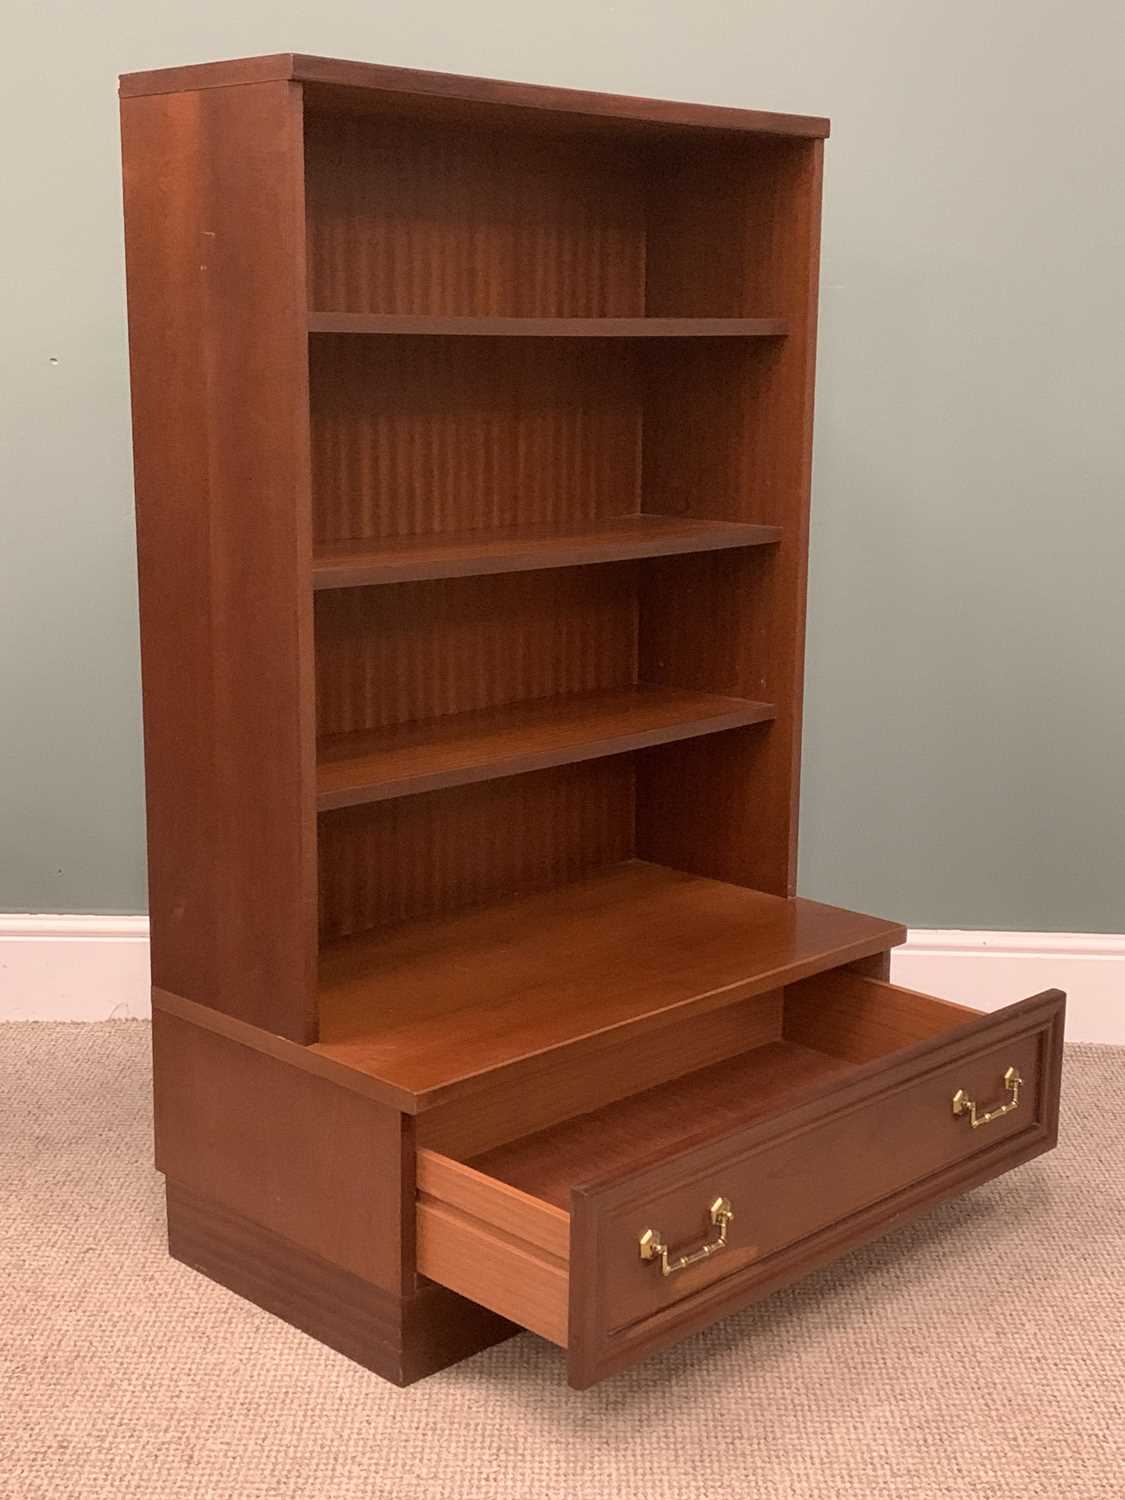 G-PLAN REPRODUCTION MAHOGANY BOOKCASE with base drawer, 130 (h) x 82 (w) x 46 (d) cms, TABLETOP - Image 5 of 6